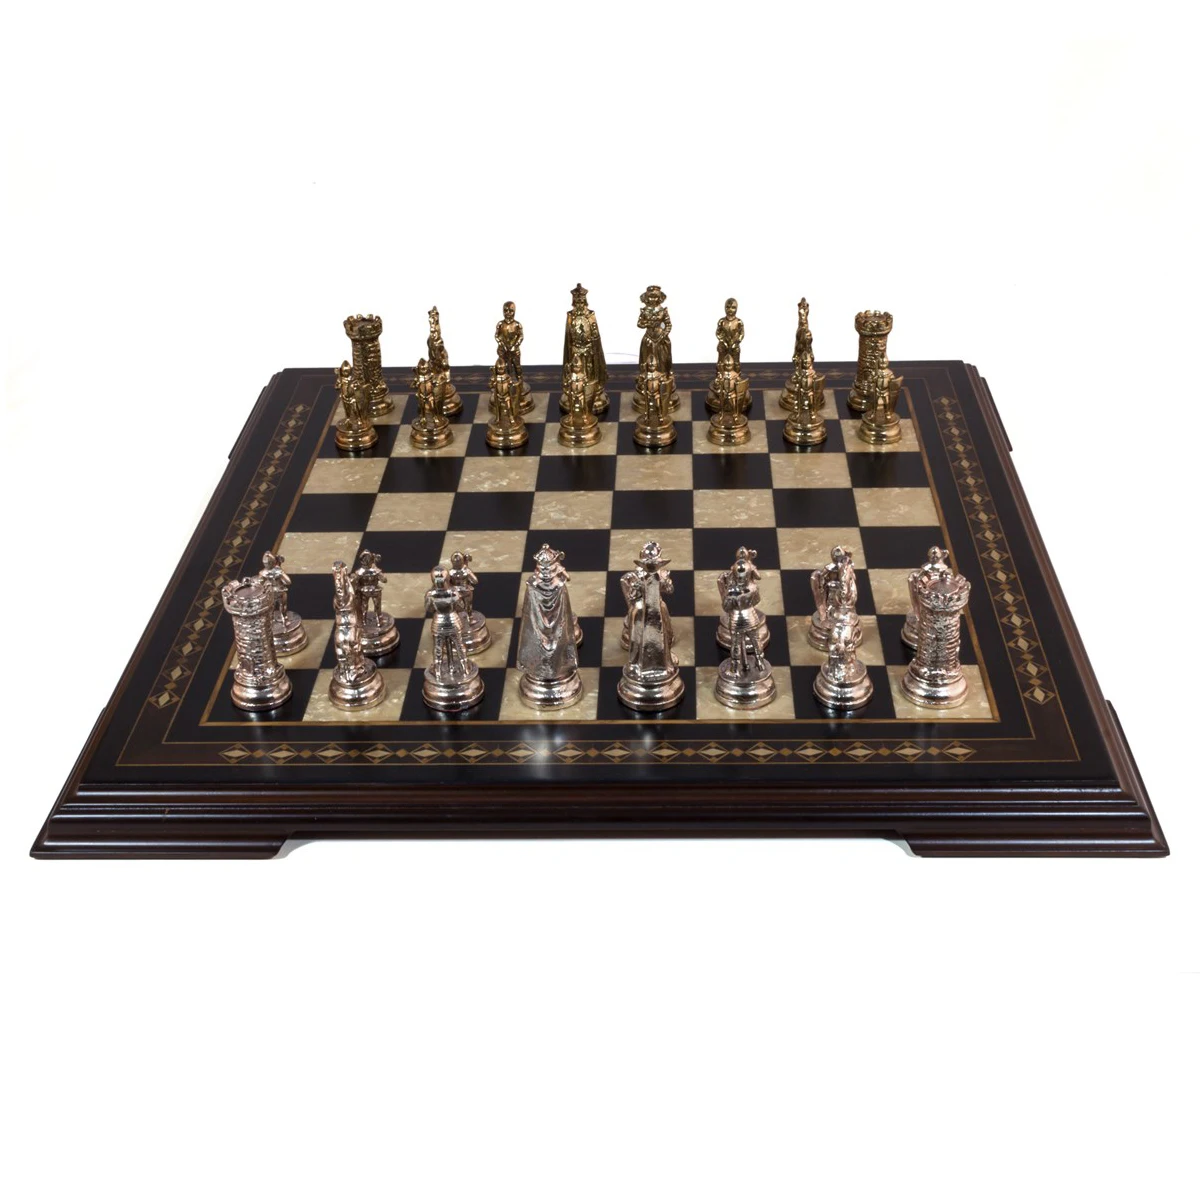 22.5'' Flat Footed Black Chessboard - Solid Beech Wood Mosaic Engraved Chess Board Game Gift Items Deck Box Checkers Шахматы шахматы